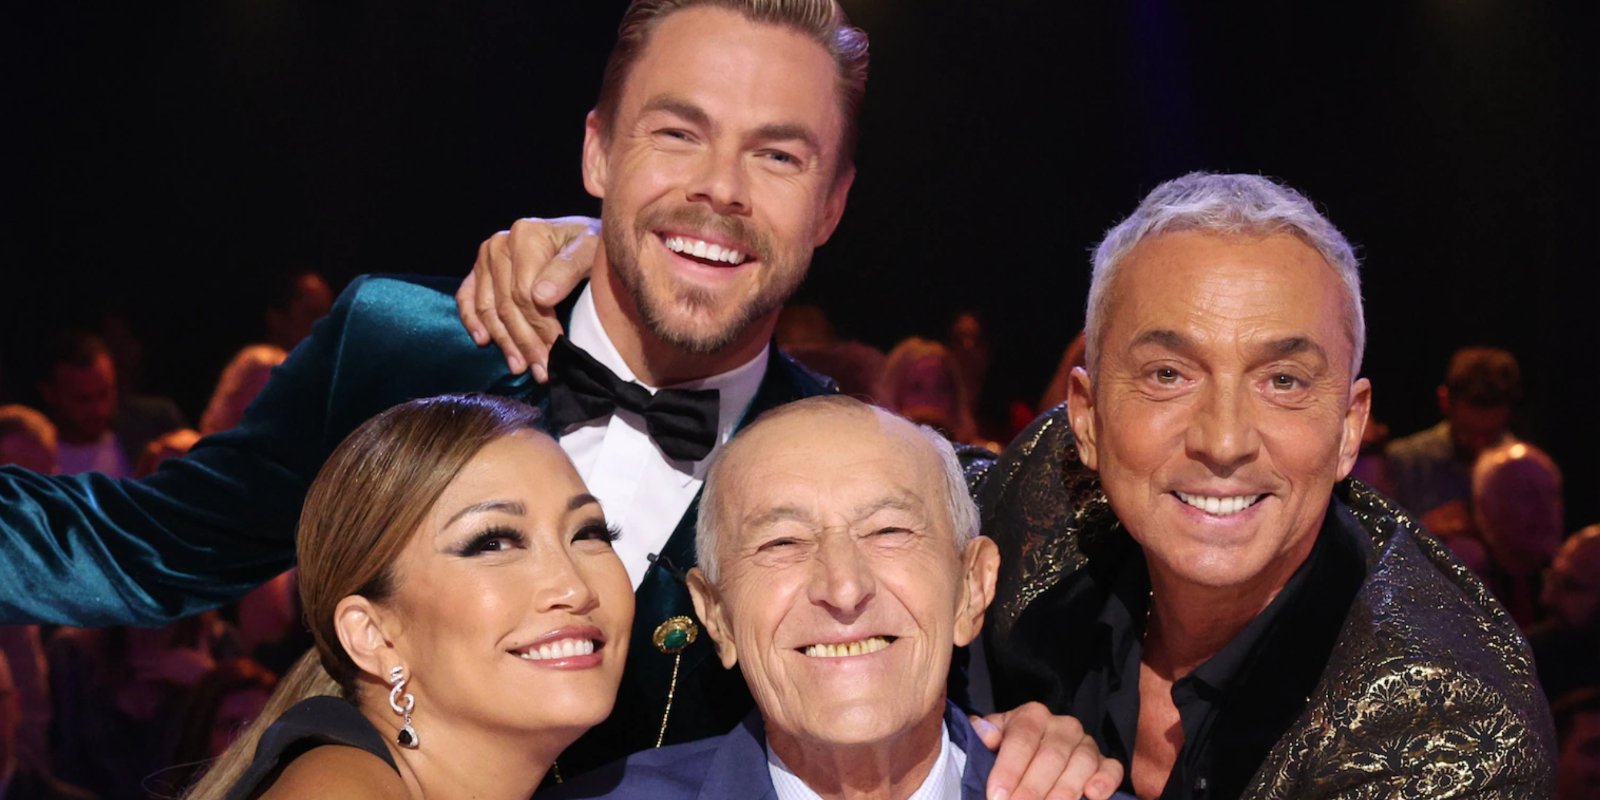 Carrie Ann Inaba, Derek Hough, Len Goodman, and Bruno Tonioli seated behind the judges table of 'Dancing with the Stars.'